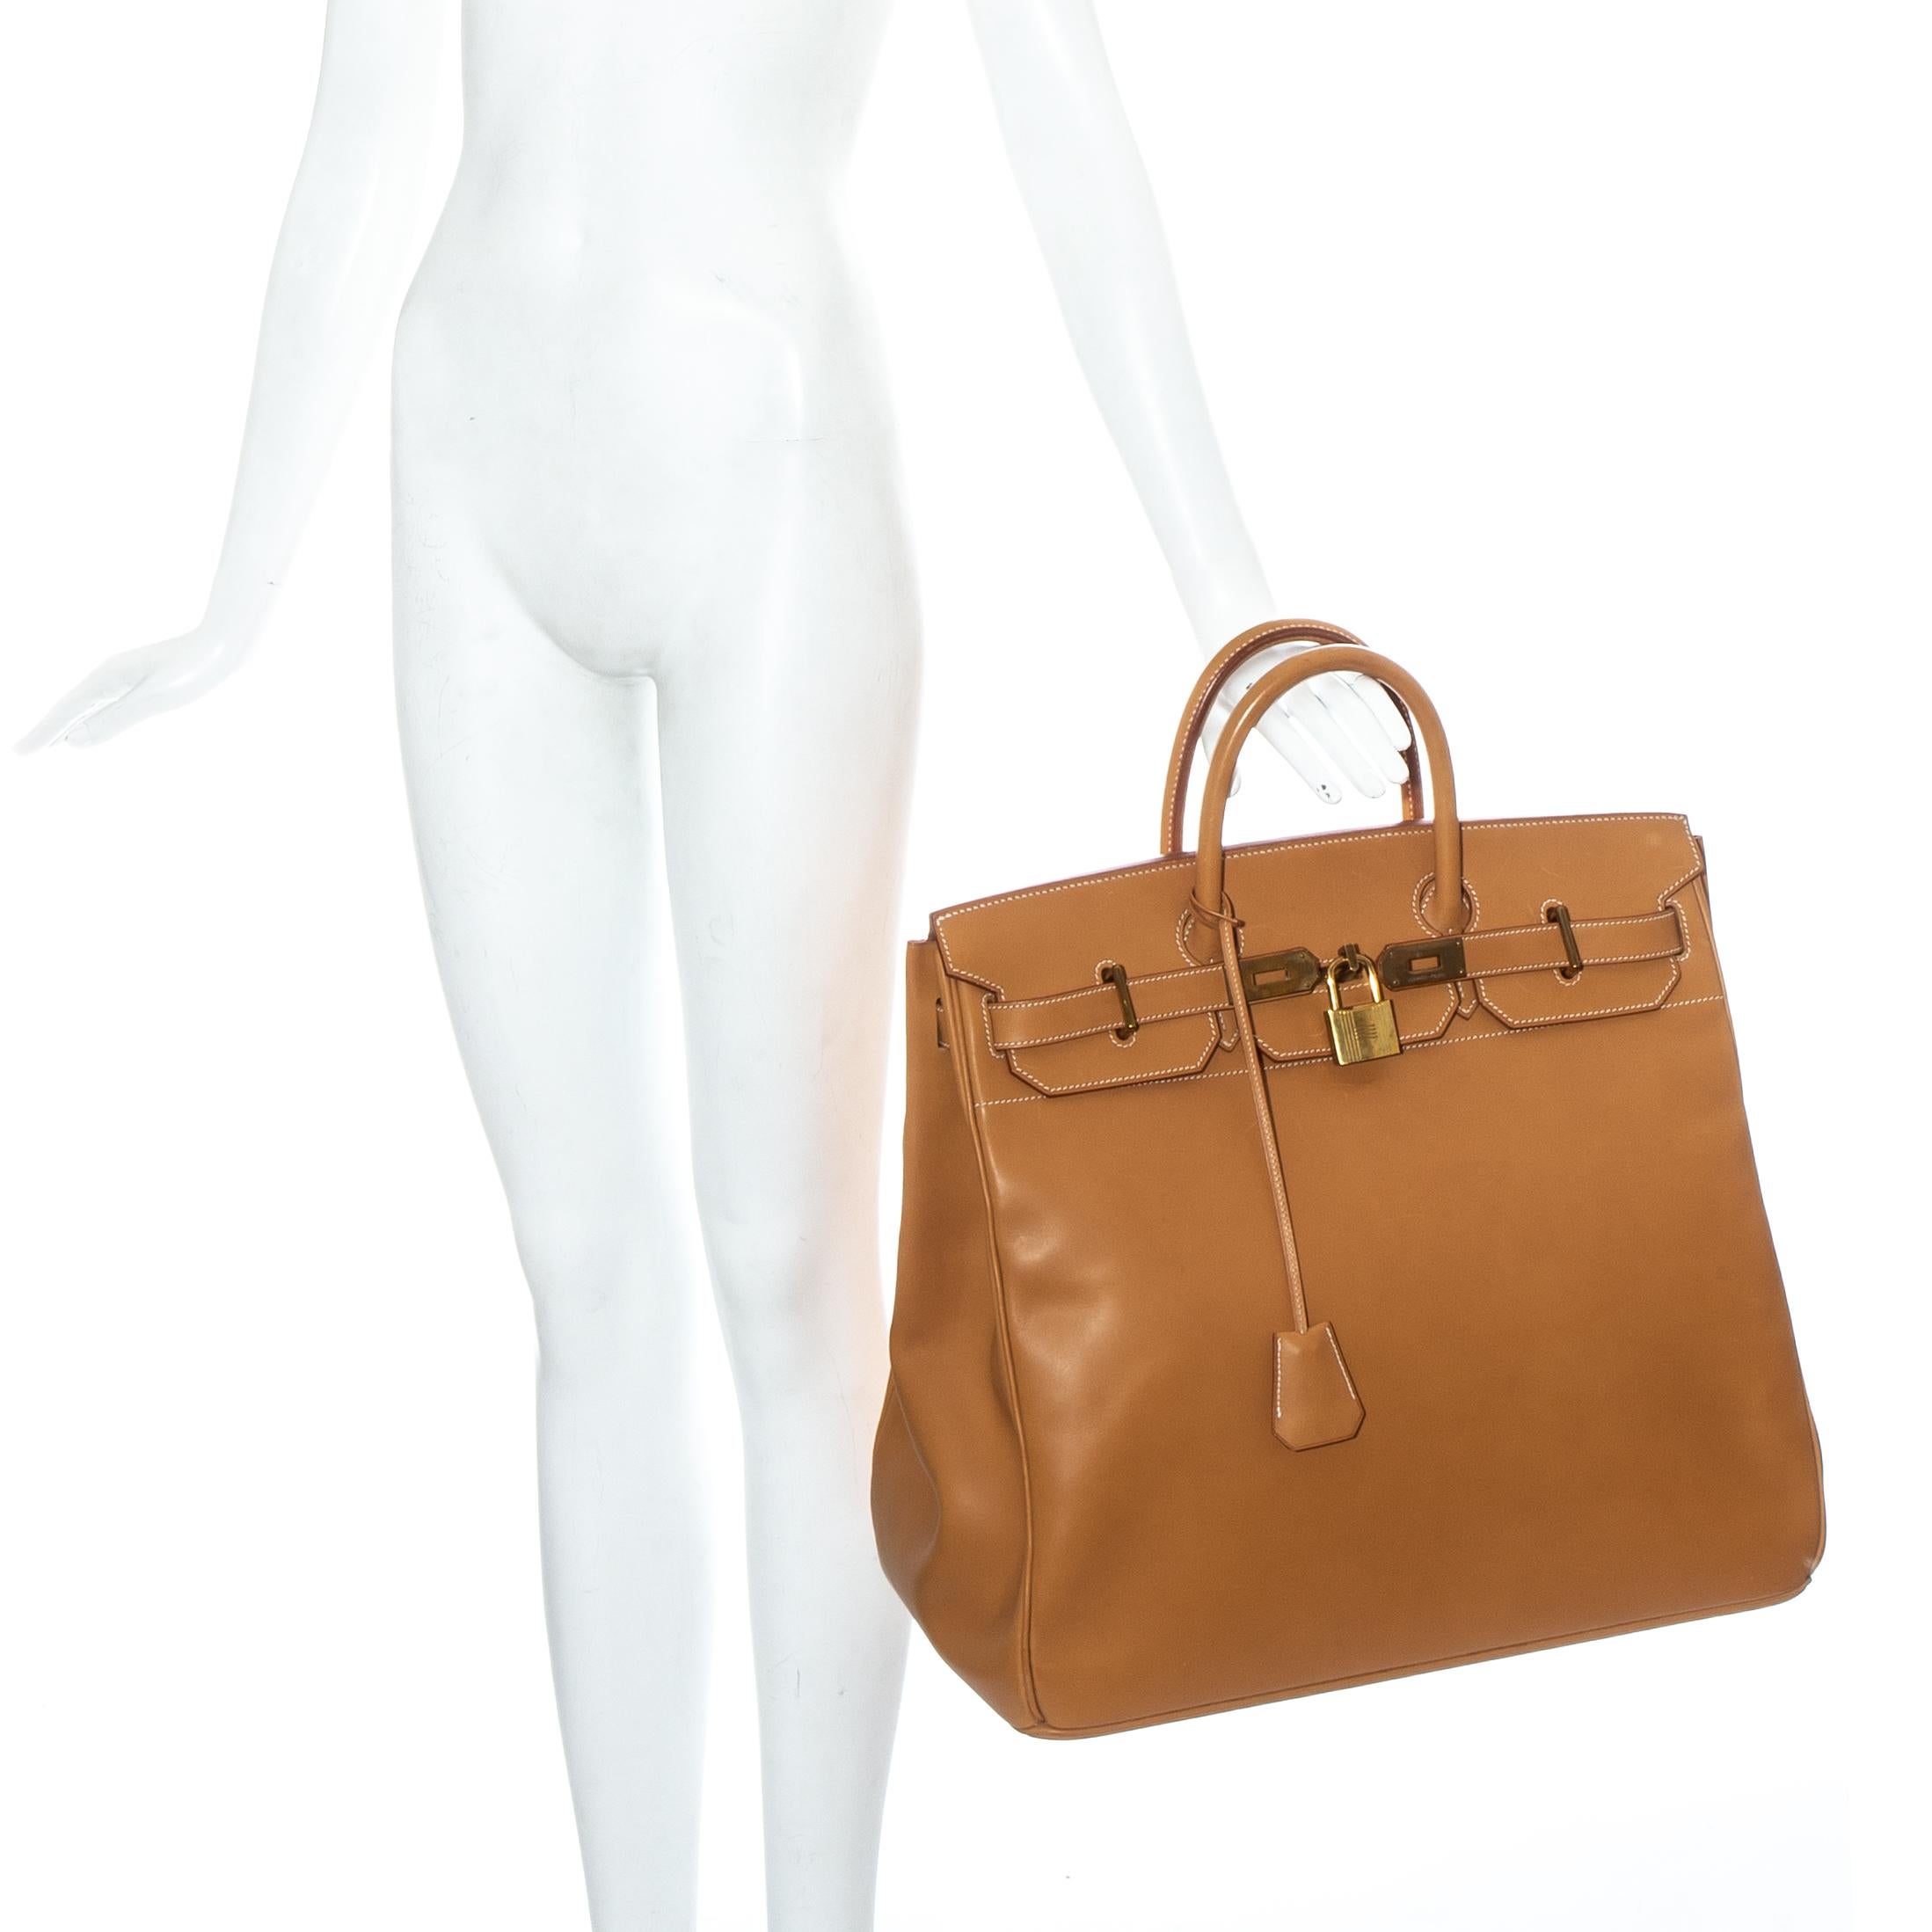 Hermes HAC Birkin bag, size 45. Tan Vache Natural leather with unpolished gold hardware. 

Made in 1998